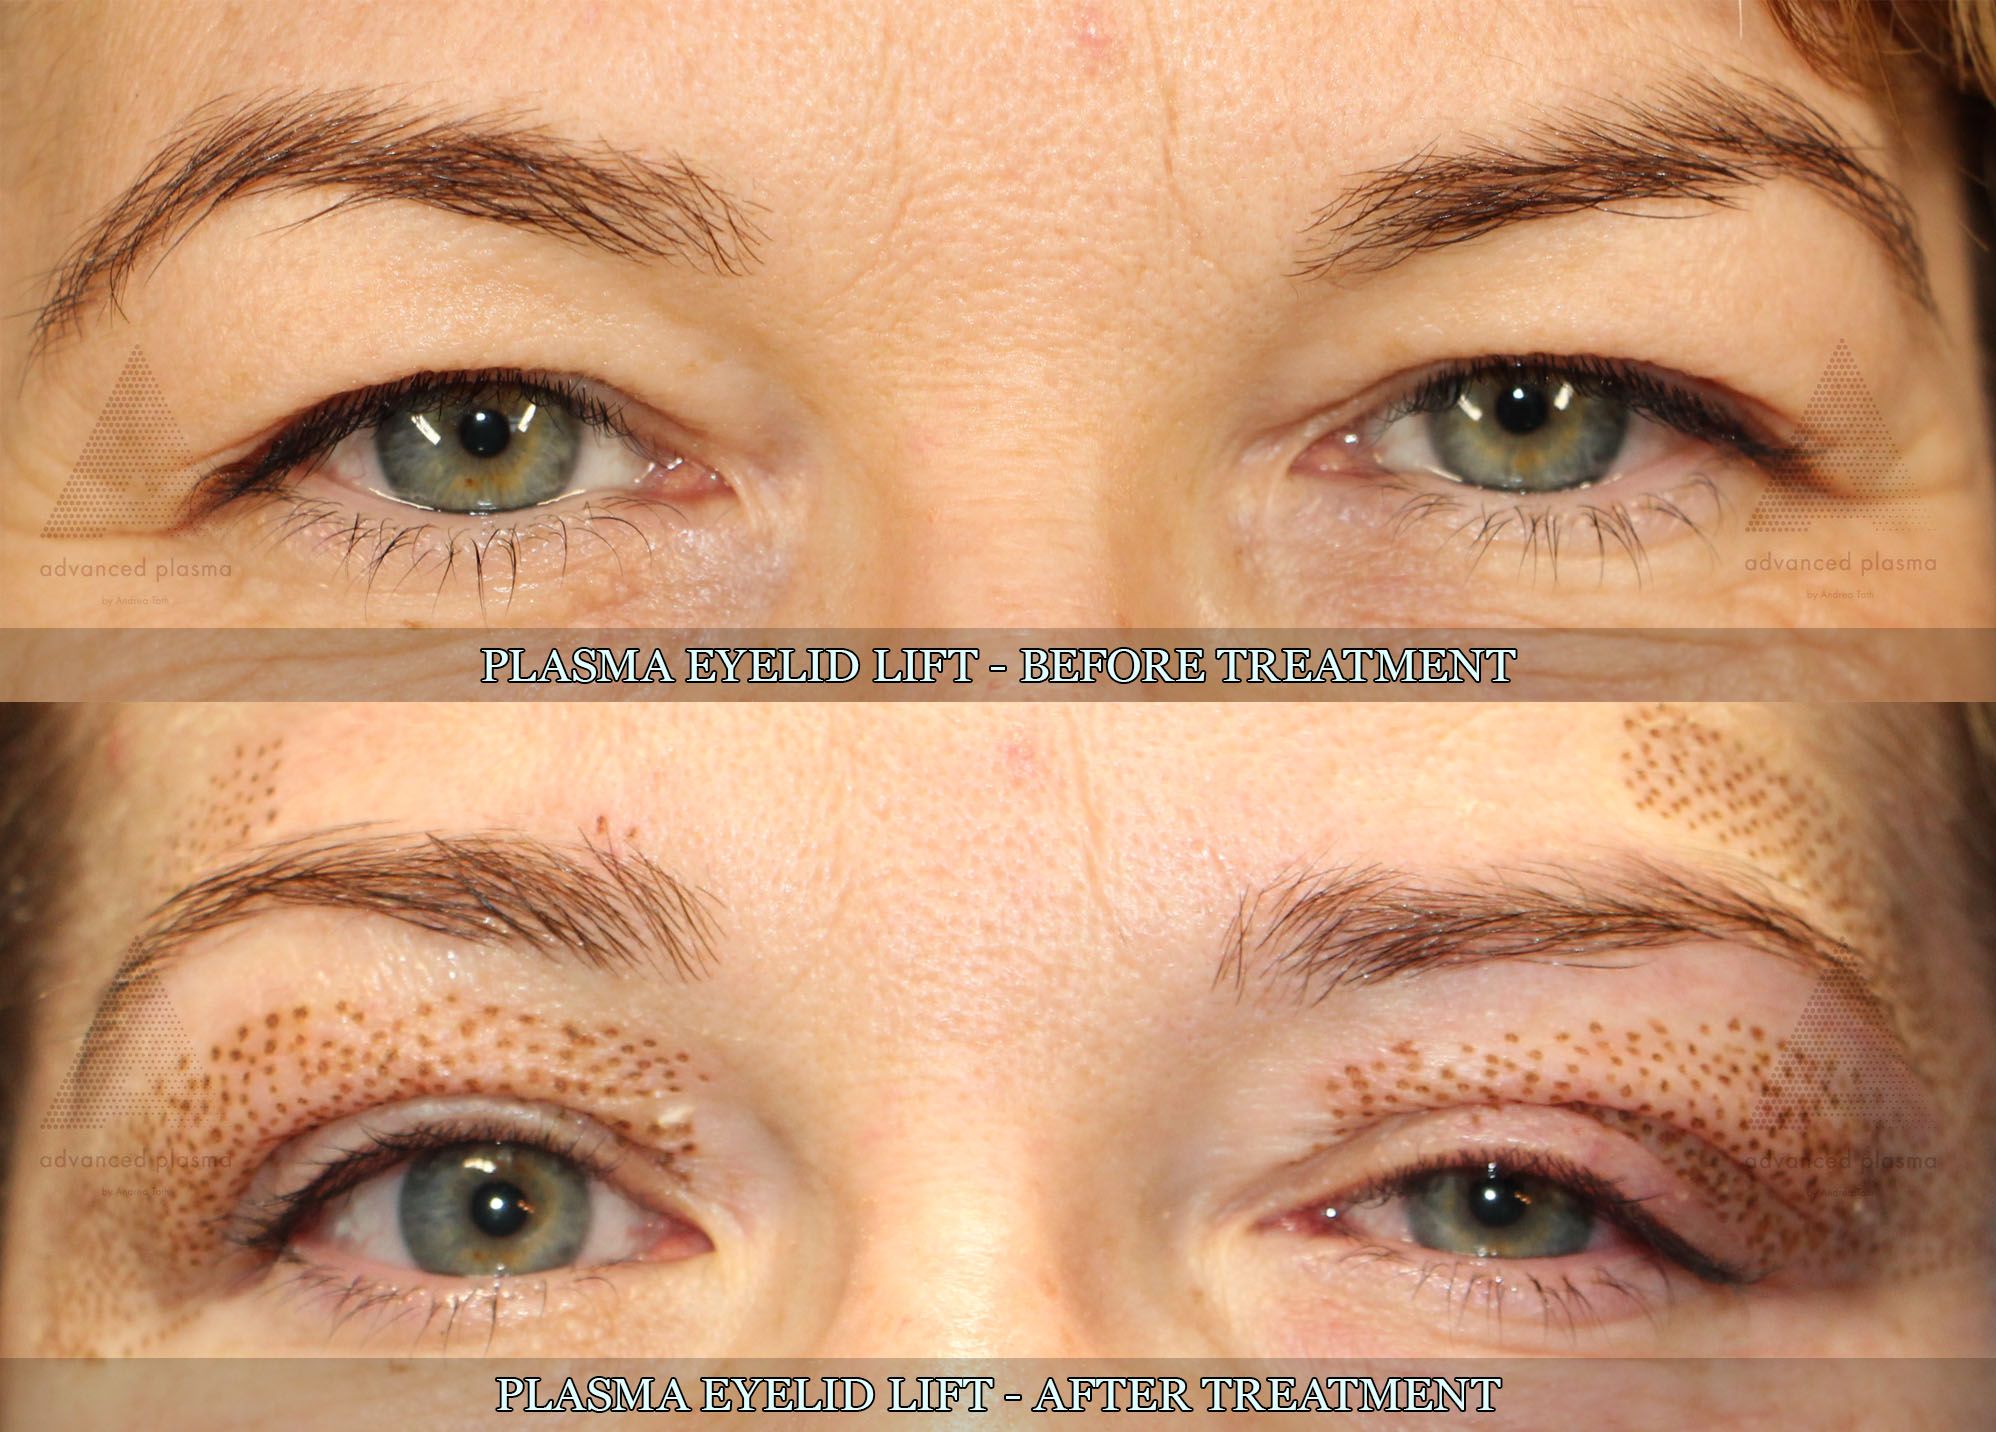 Before and after Plasma Eyelid Lift